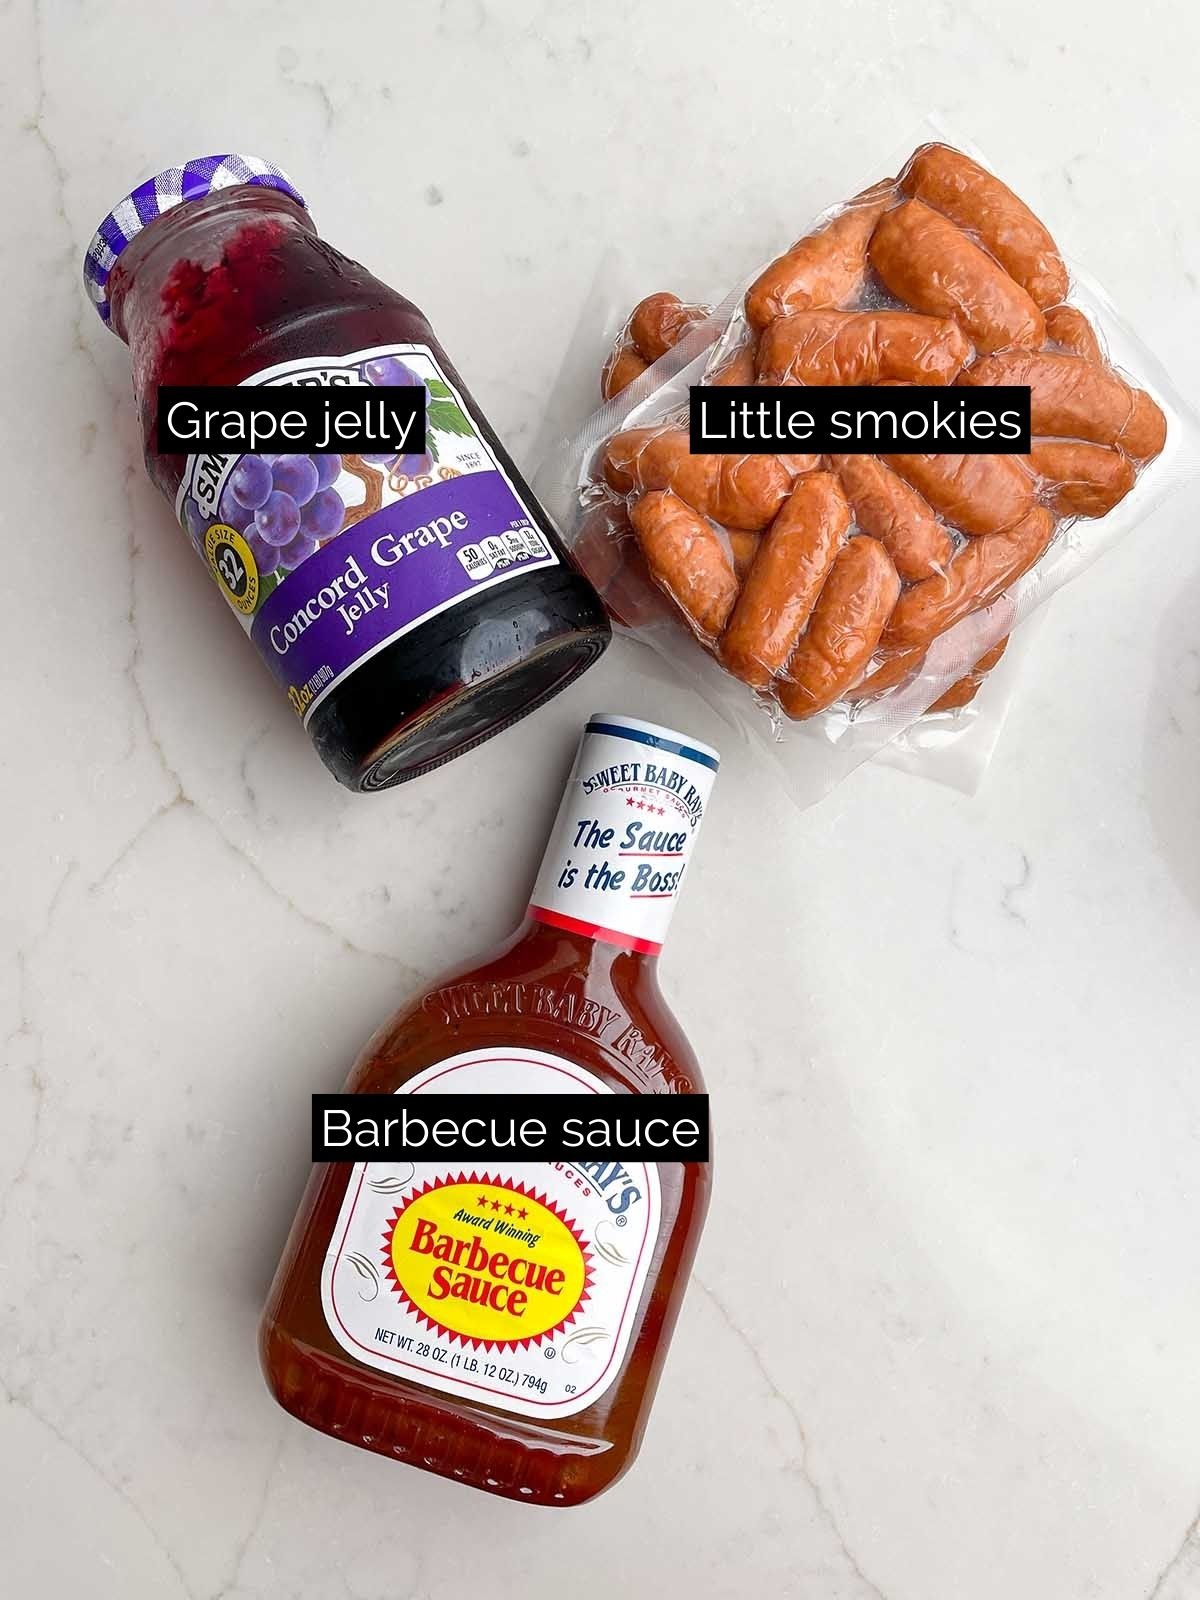 lil smokies recipe with grape jelly and bbq sauce ingredients.